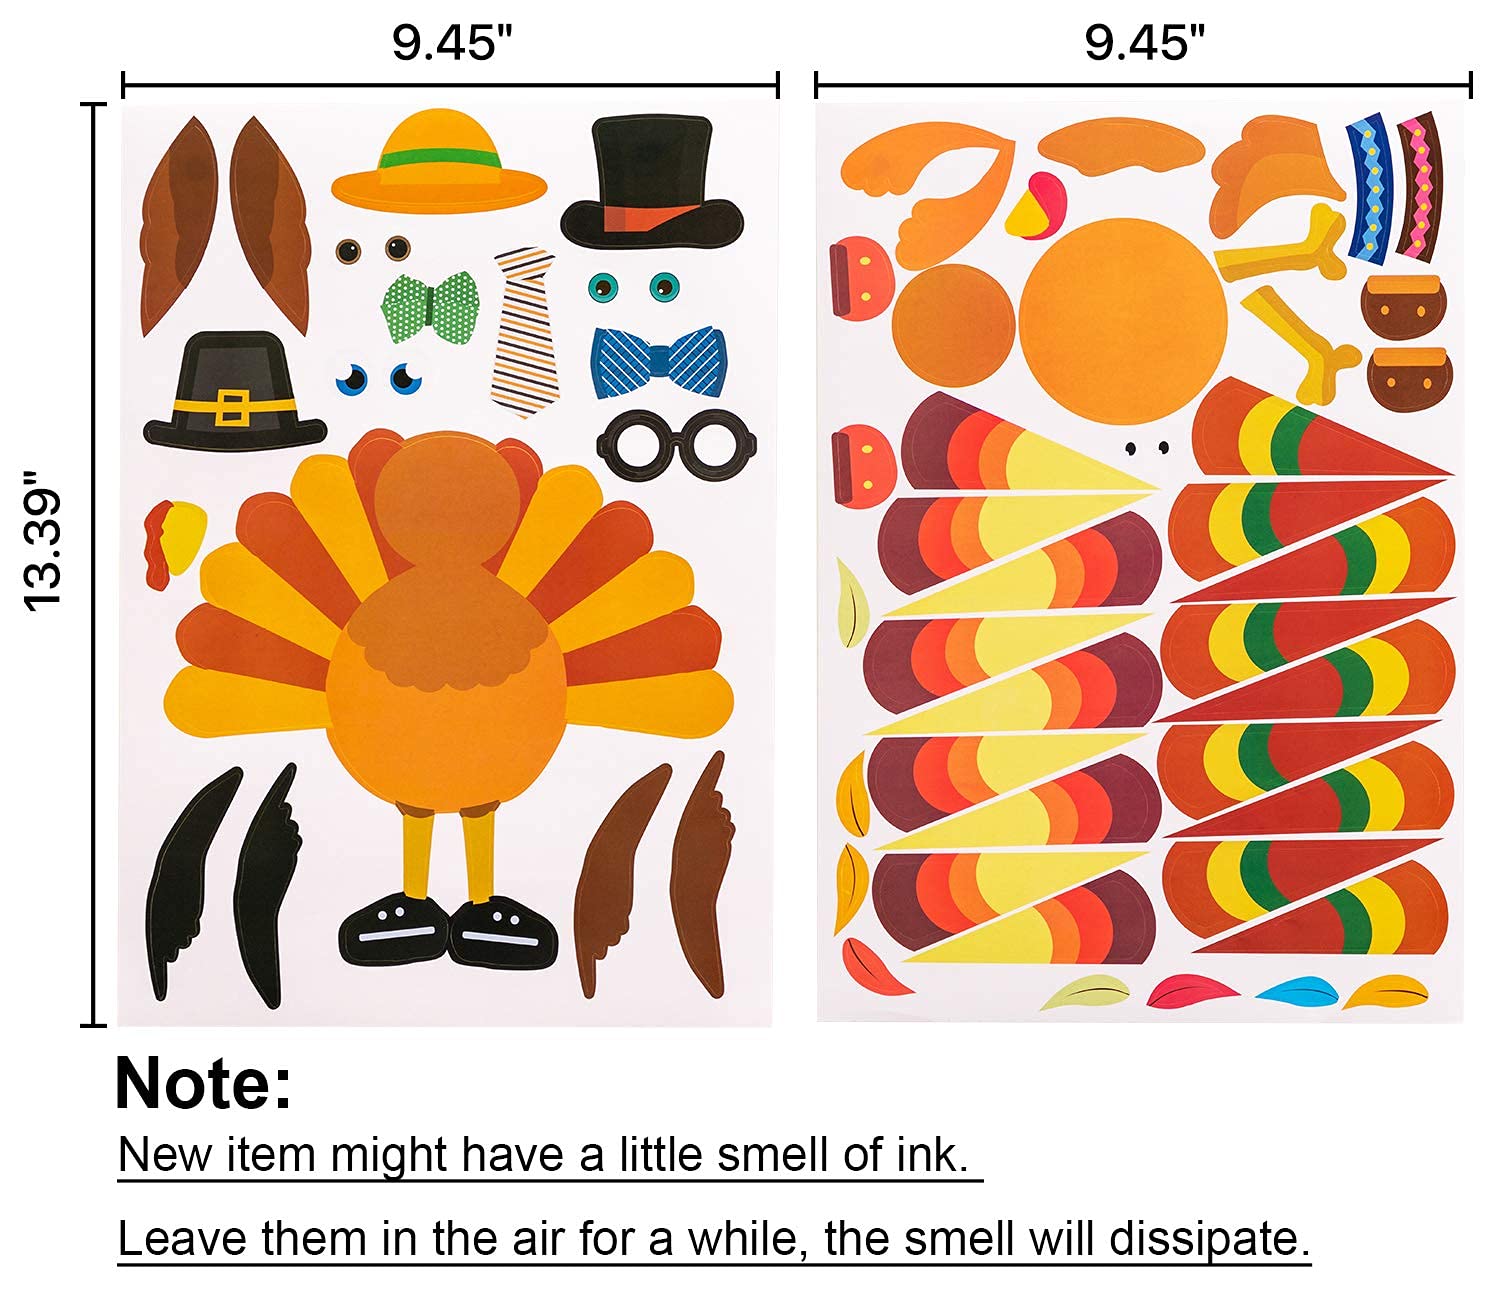 Make-A-Turkey Stickers Thanksgiving Party Games/Favors/Supplies - Set Of 36